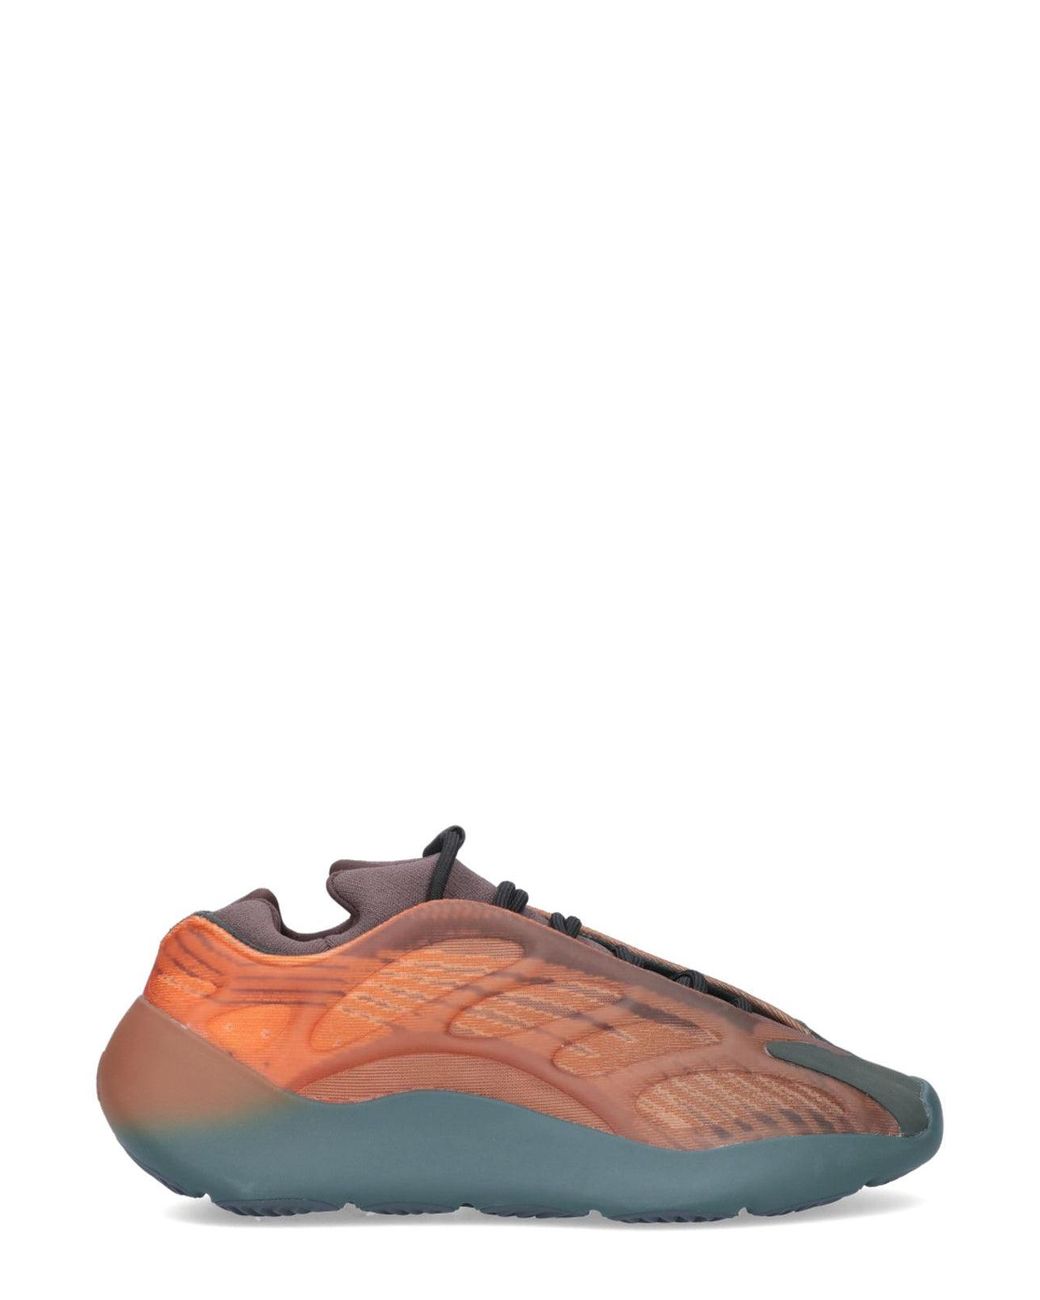 adidas Rubber Yeezy 700 V3 Copper Fade Lace-up Sneakers in Brown 